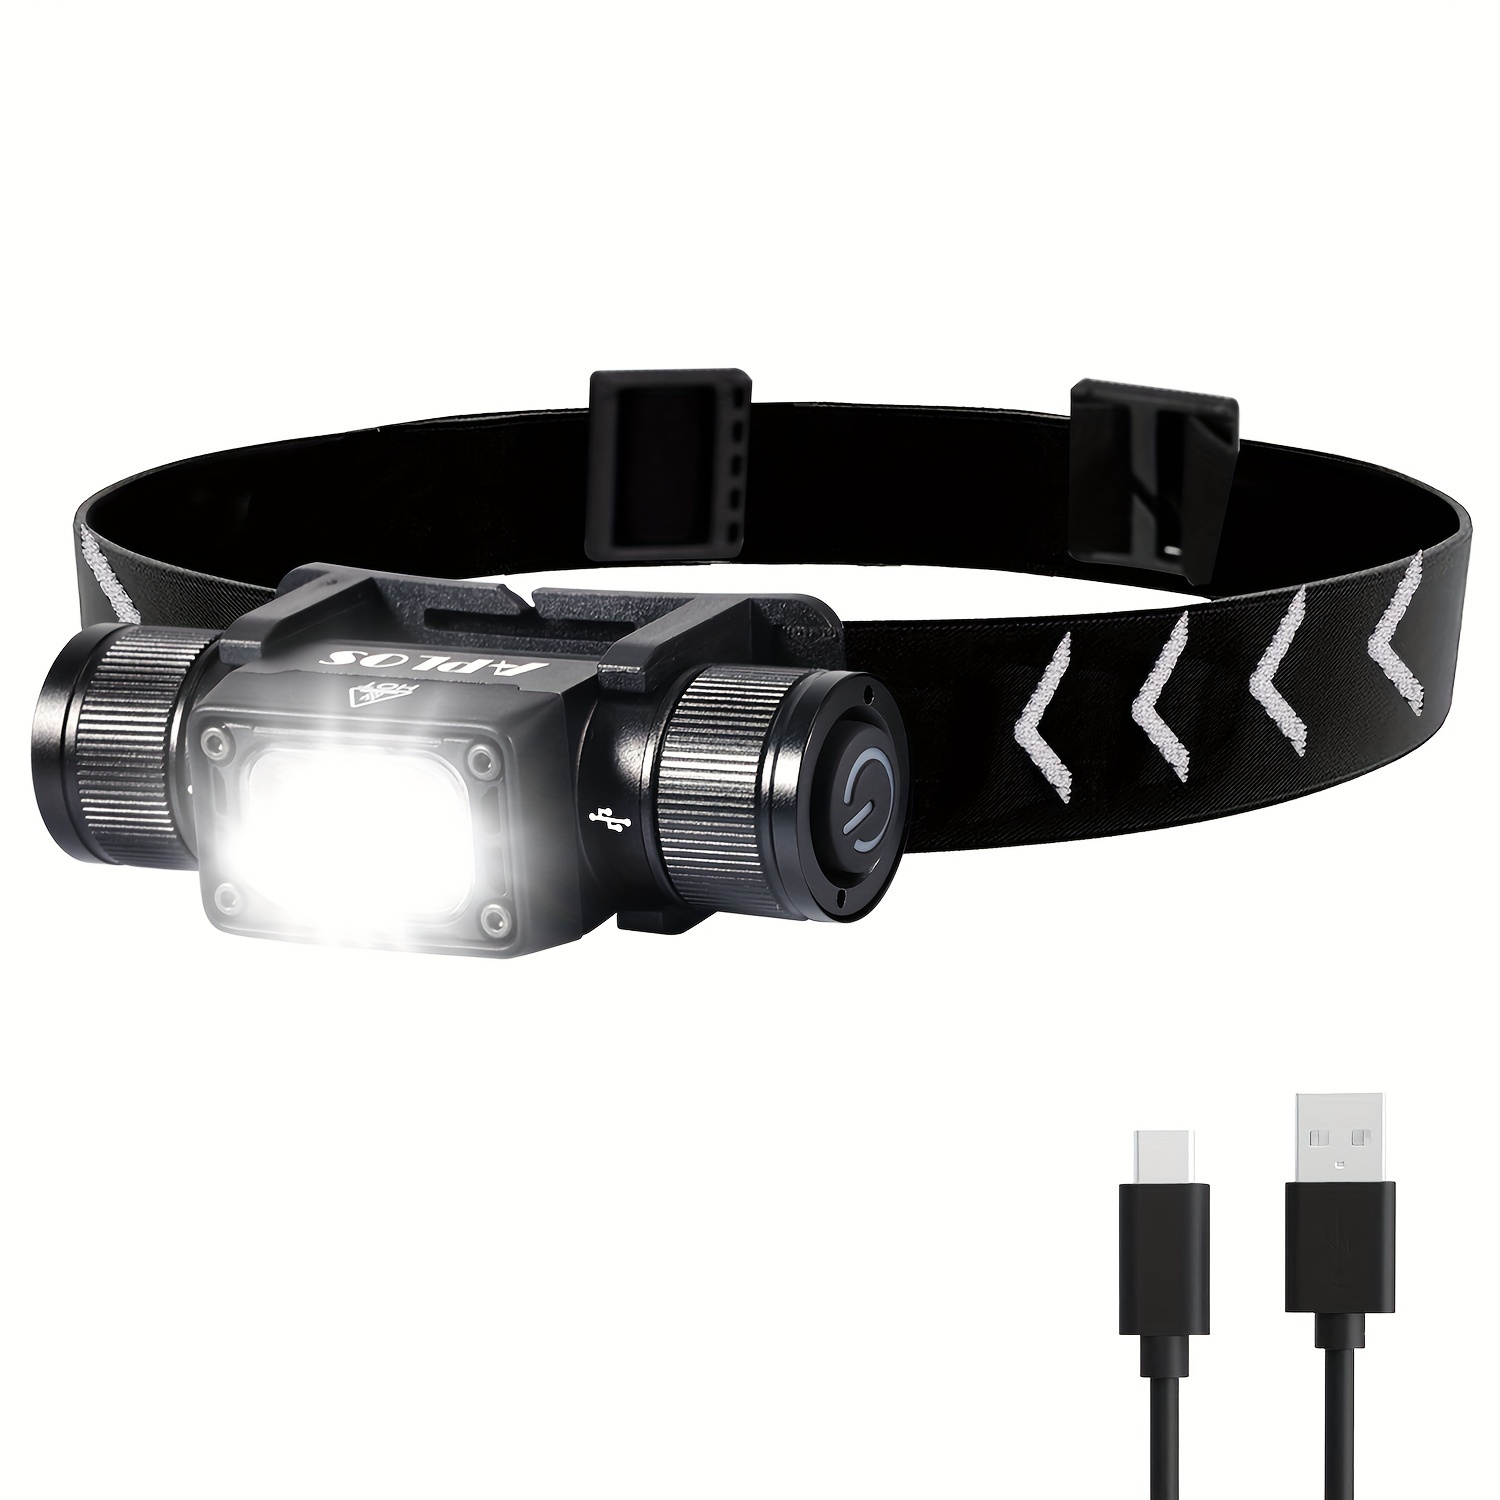 

Aplos H340 Headlamps, Led Rechargeable-1500 Lumens Lightweight Headlamp With 180° Swivel Base, Super Bright Led Headlamp Rechargeable With Red Light Mode